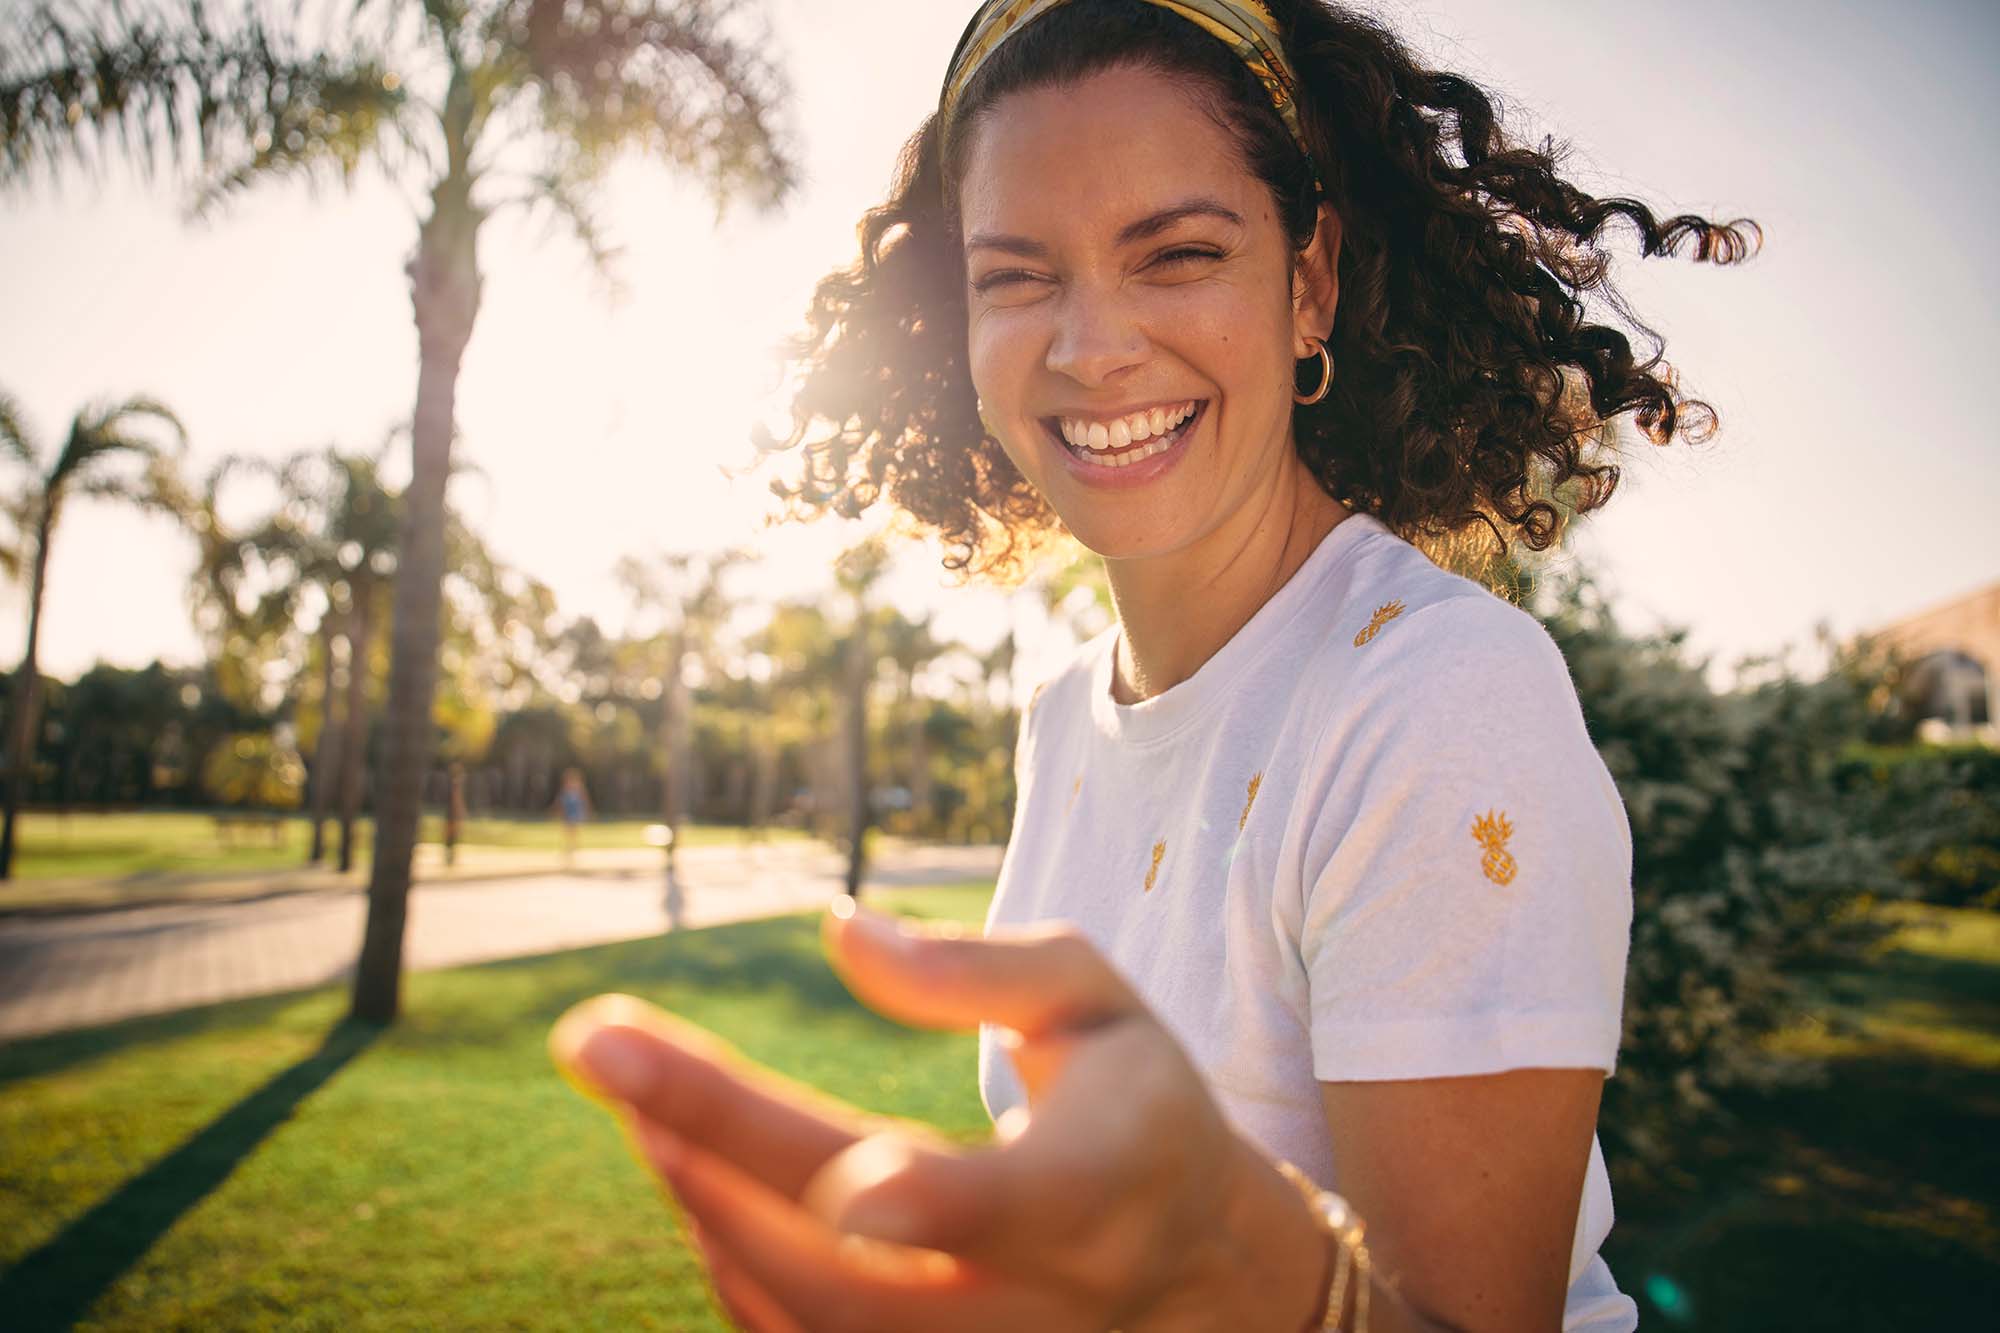 A woman with curly hair, wearing a white shirt with small yellow pineapple prints, is smiling and reaching toward the camera. She is outdoors in a park with palm trees and greenery, and the sunlight creates a warm, bright atmosphere. She is also wearing a headband and hoop earrings.